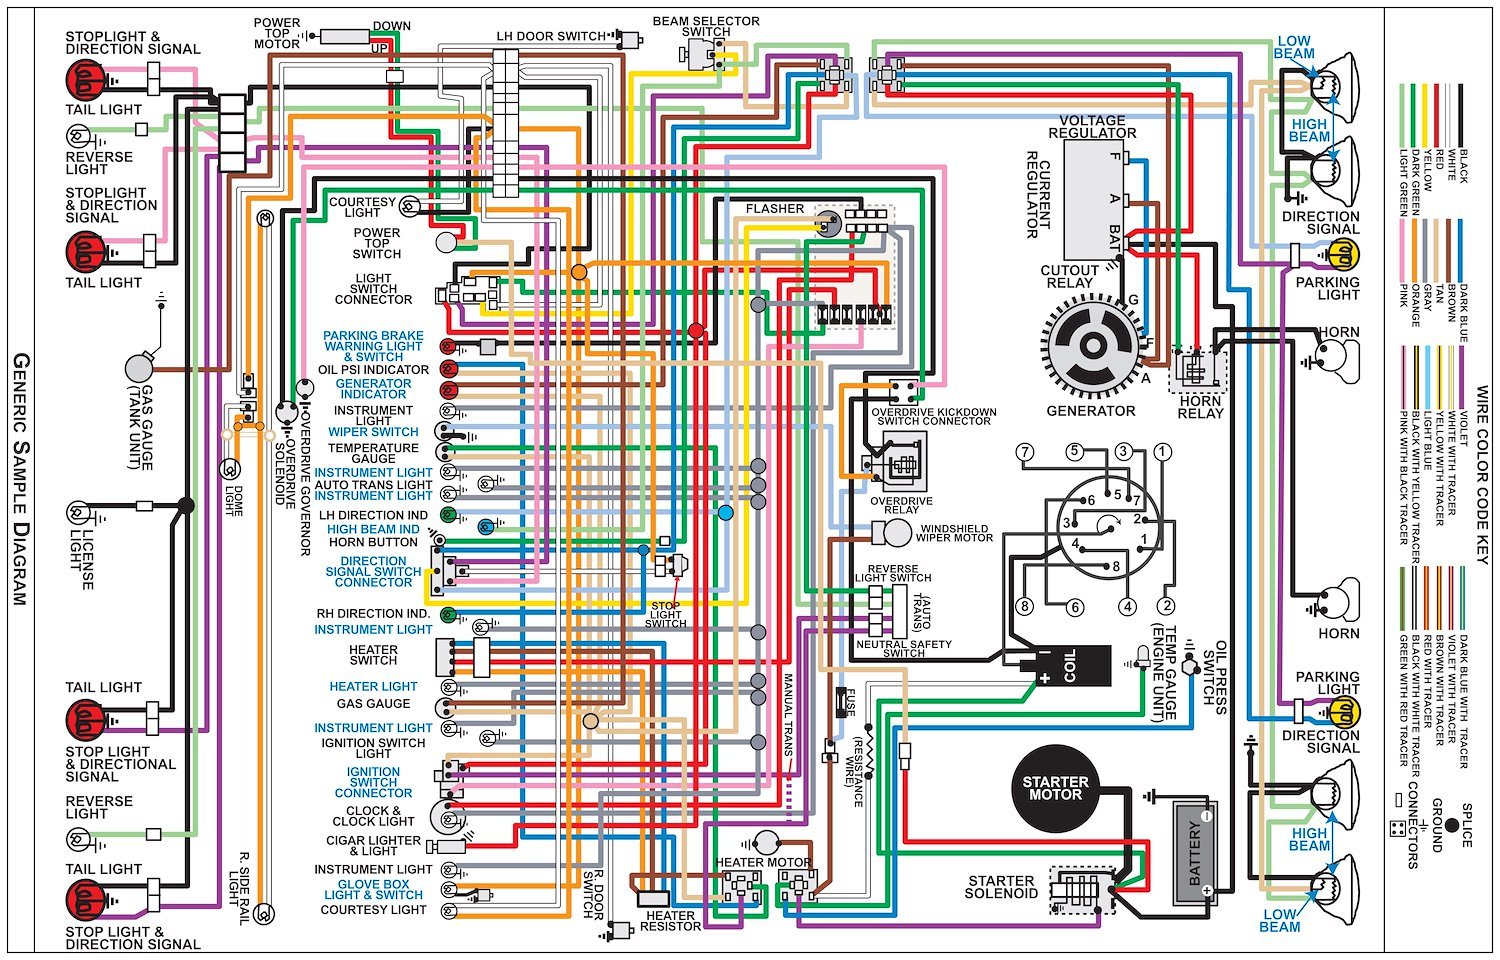 Wiring Diagram for 1968 Dodge Charger, 11 in x 17 in., Laminated